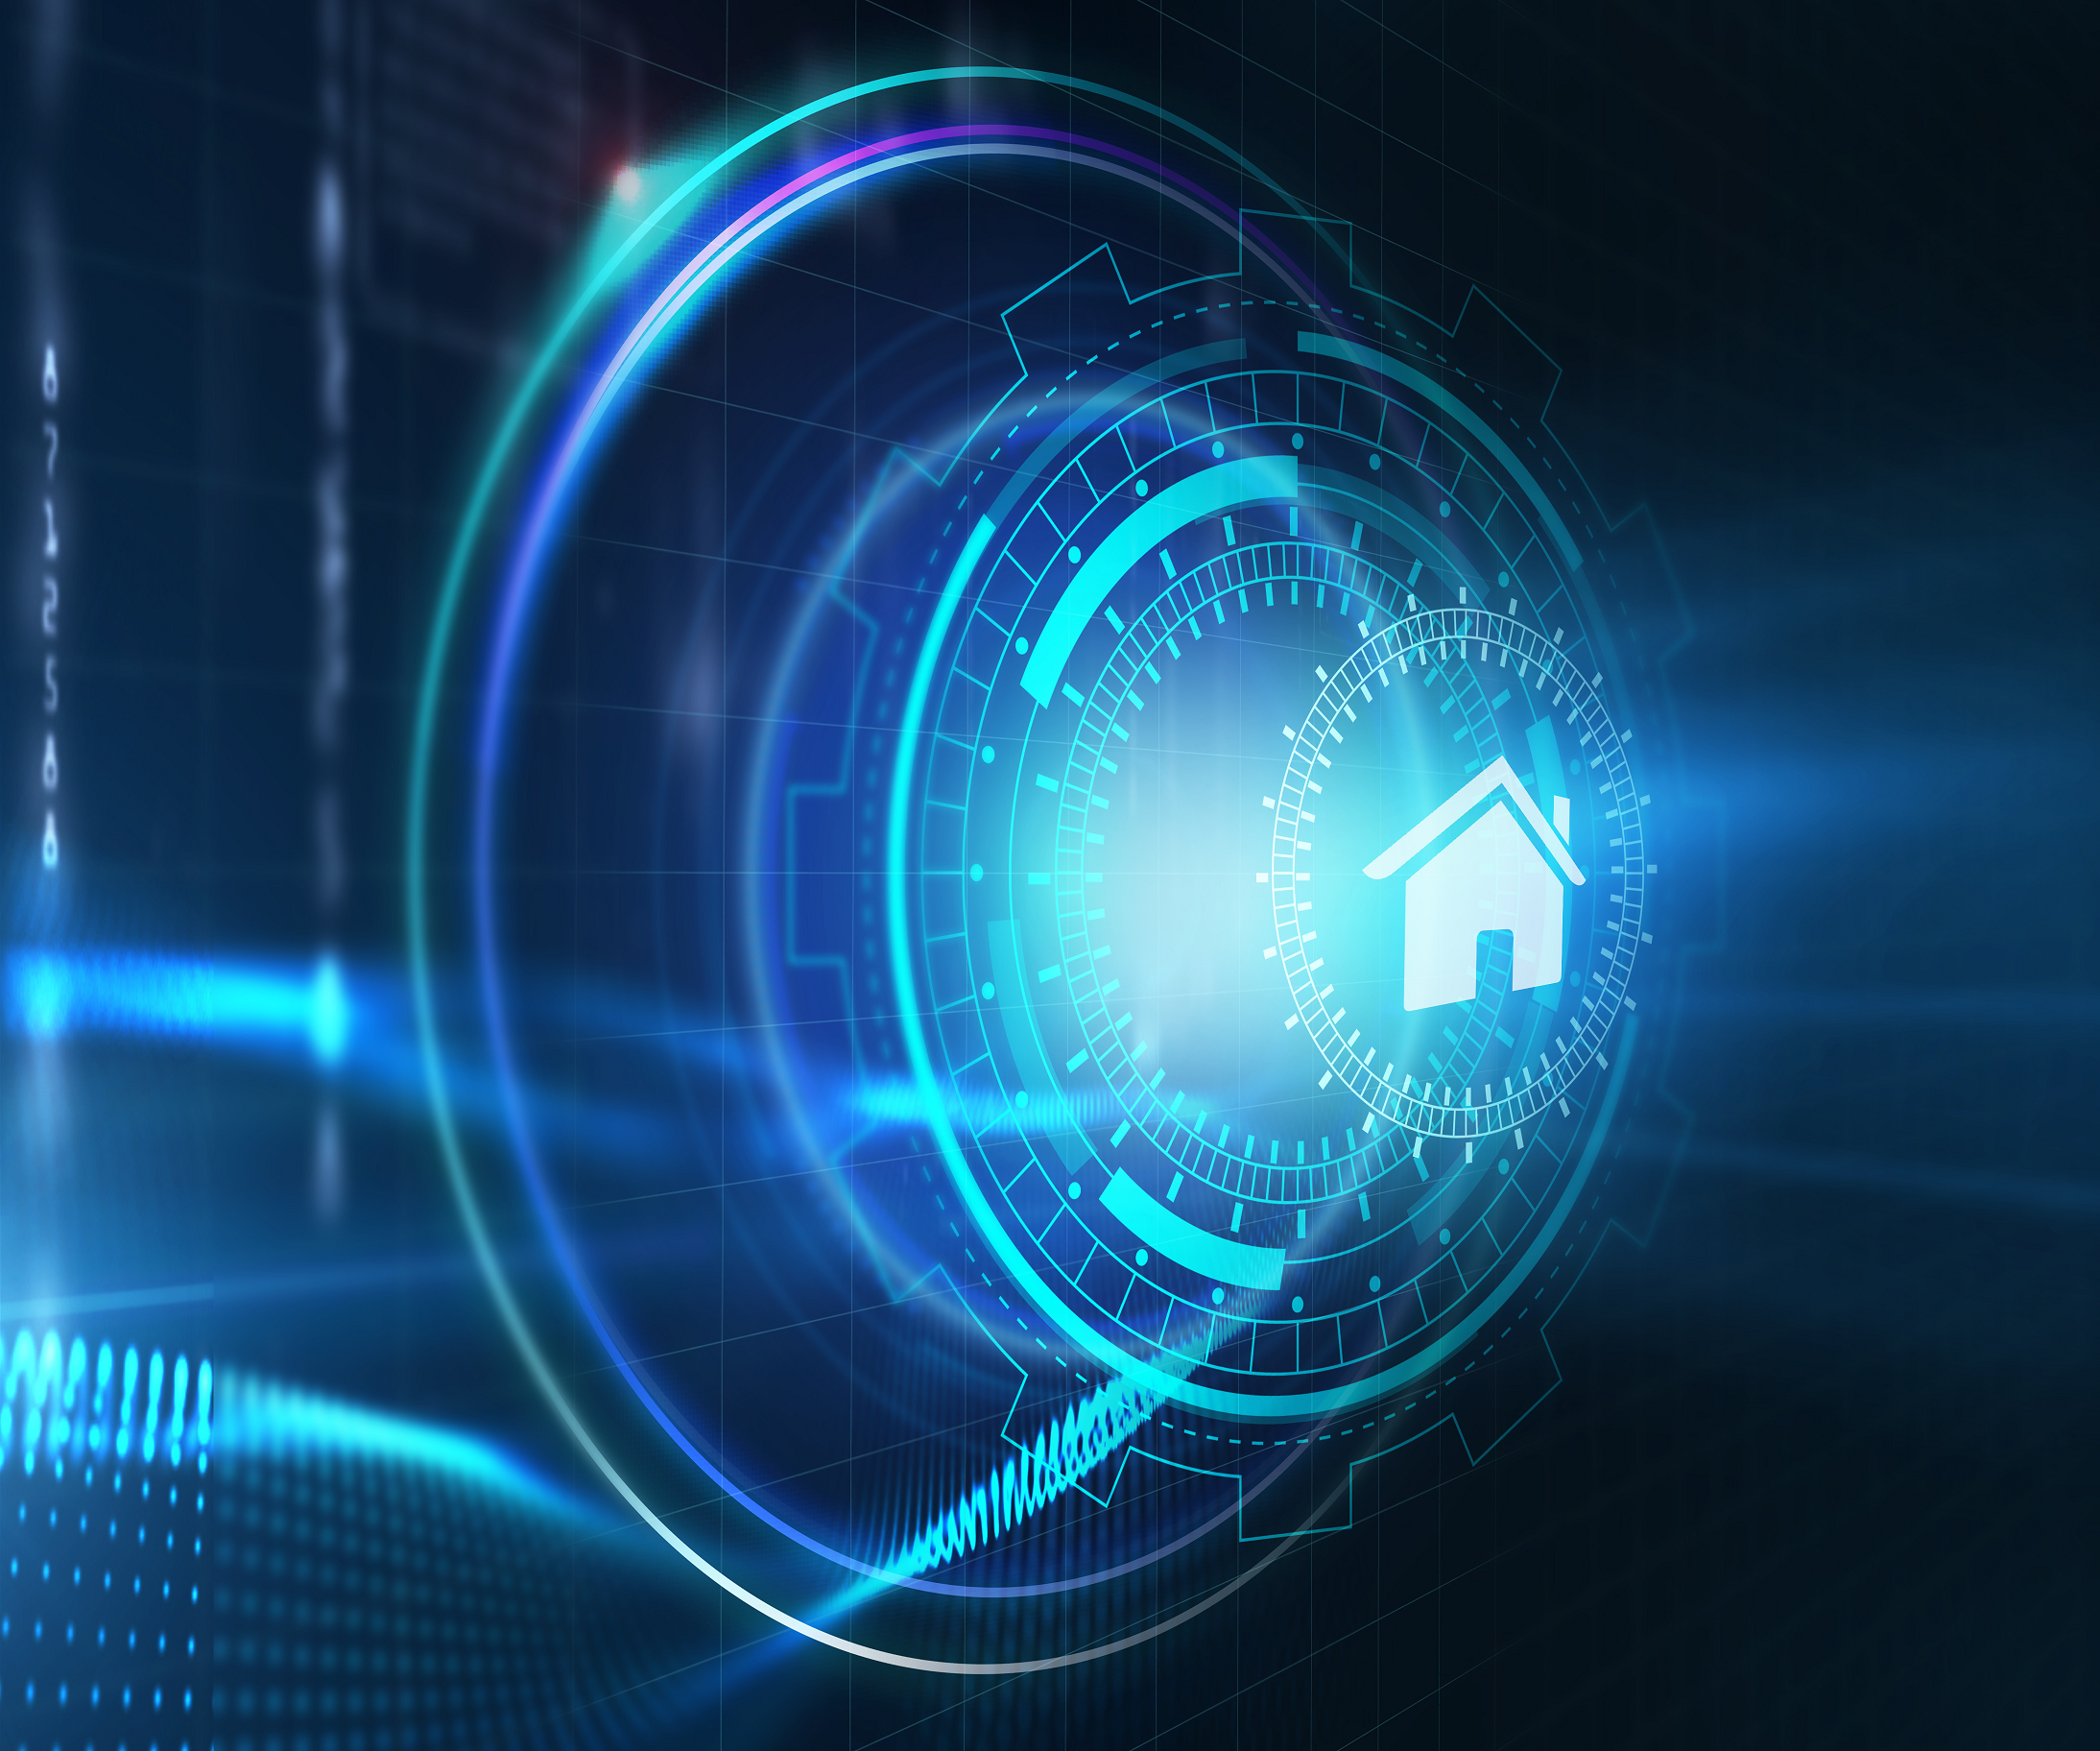 The RESO Web API is quickly becoming the preeminent technology standard for moving real estate data between systems. MLSListings in Silicon Valley is leading the way by using RESO’s new Web API Add/Edit standard to push the industry’s technology capabilities even further forward.